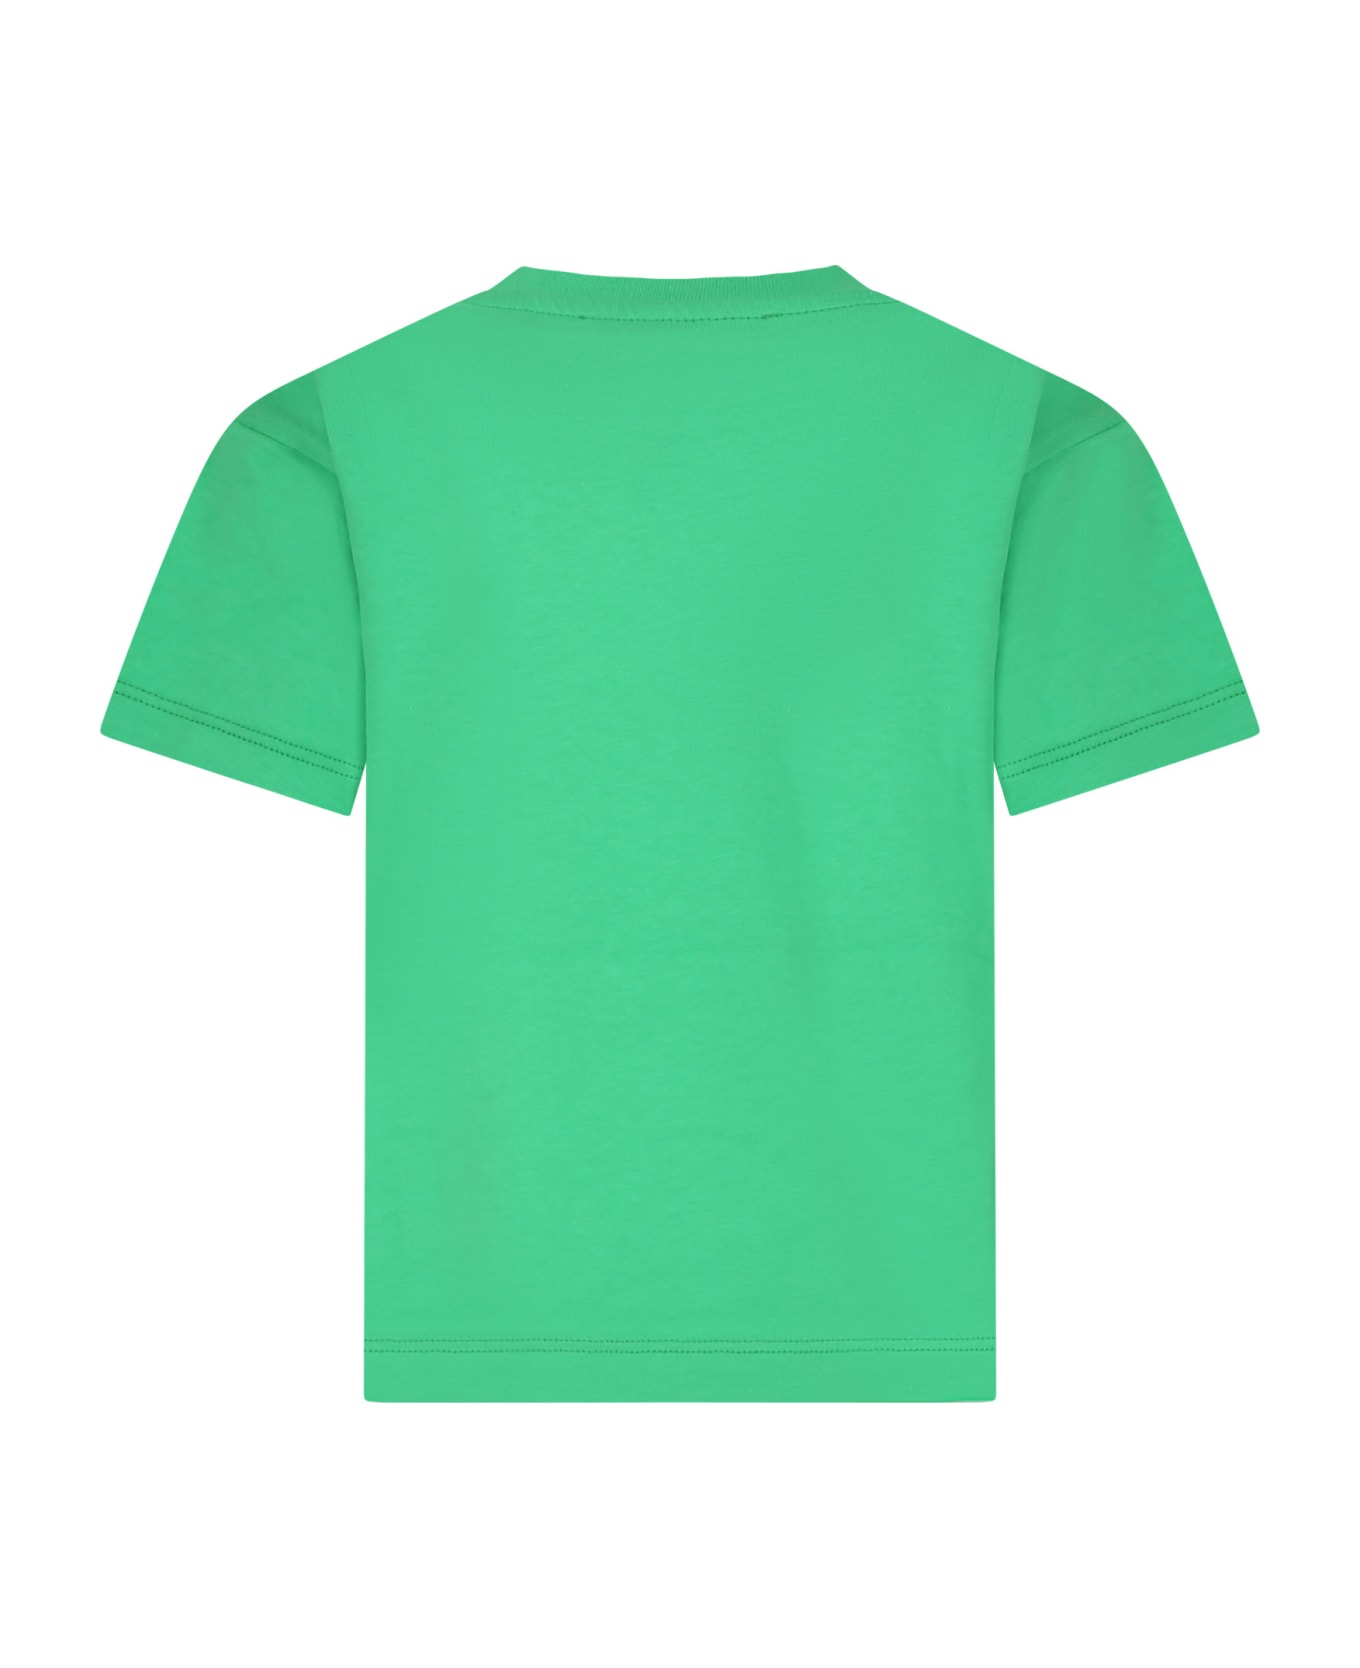 MSGM Green T-shirt For Kids With Logo - Green